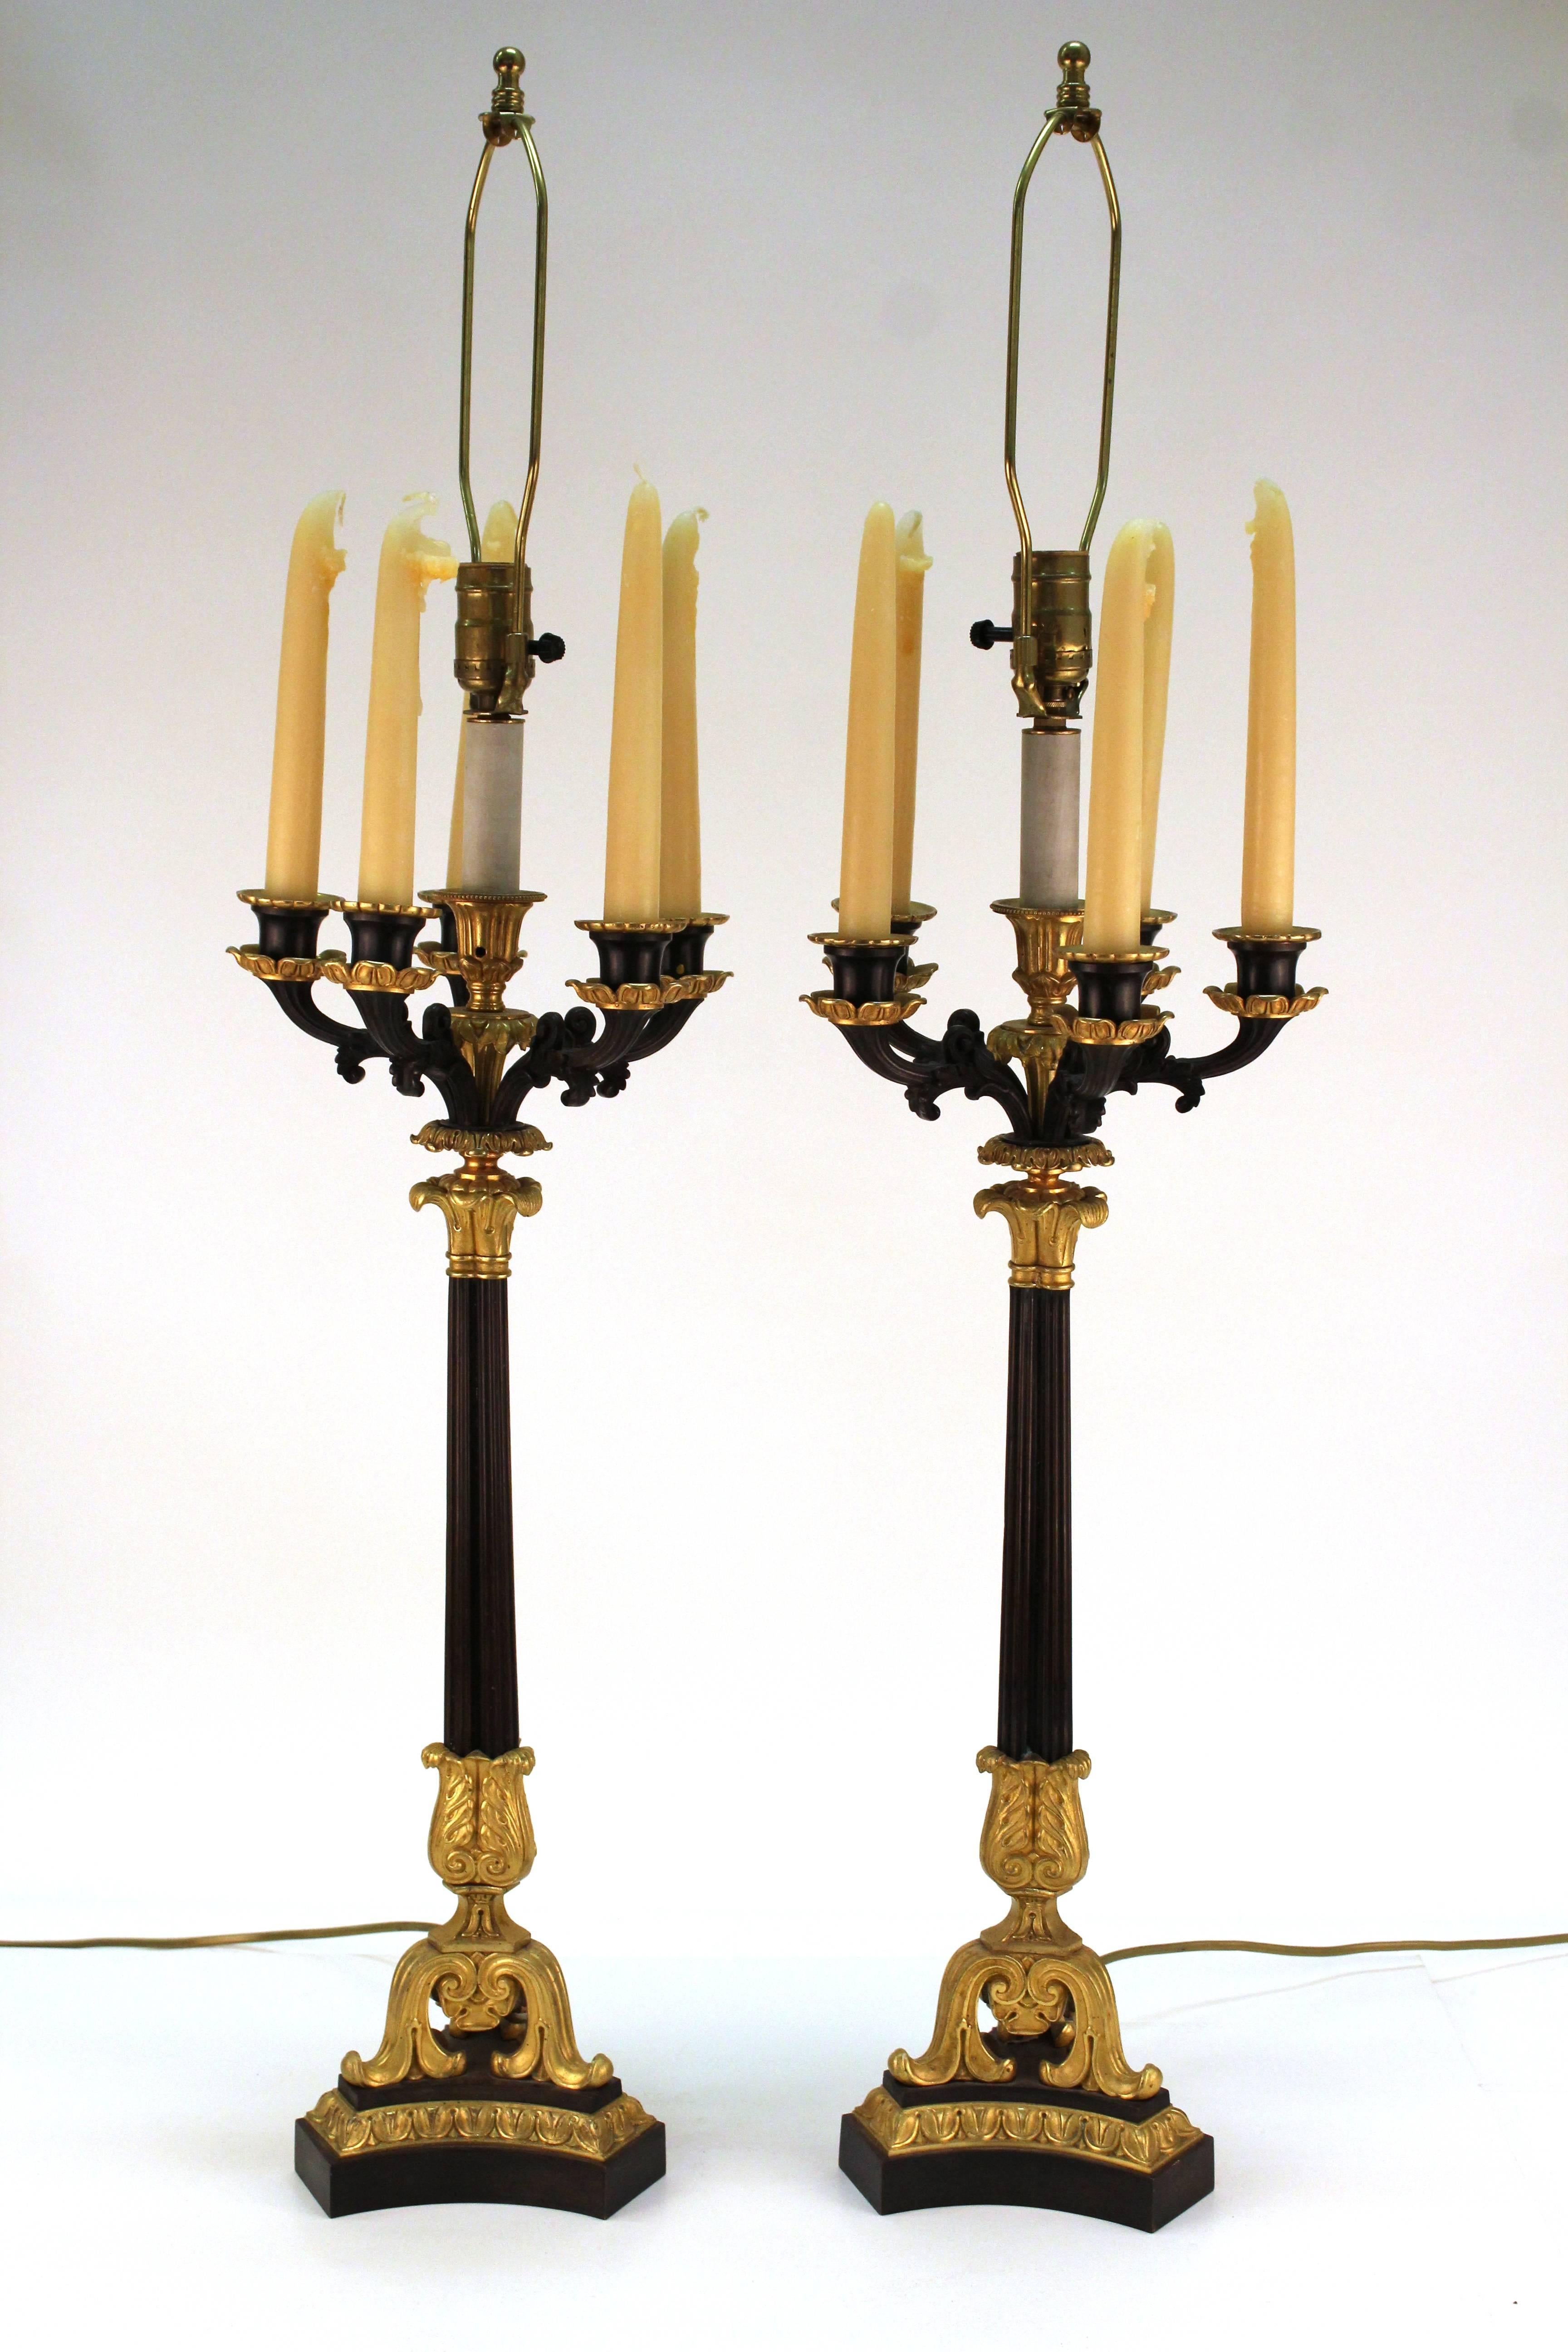 A pair of Empire style table lamps in the form of candelabras produced in France. Both pieces include five candle holders at the end of scrolled arms; shown here with real candles. The lamps are bronzed with gilt acanthus leaf accents. Both are in